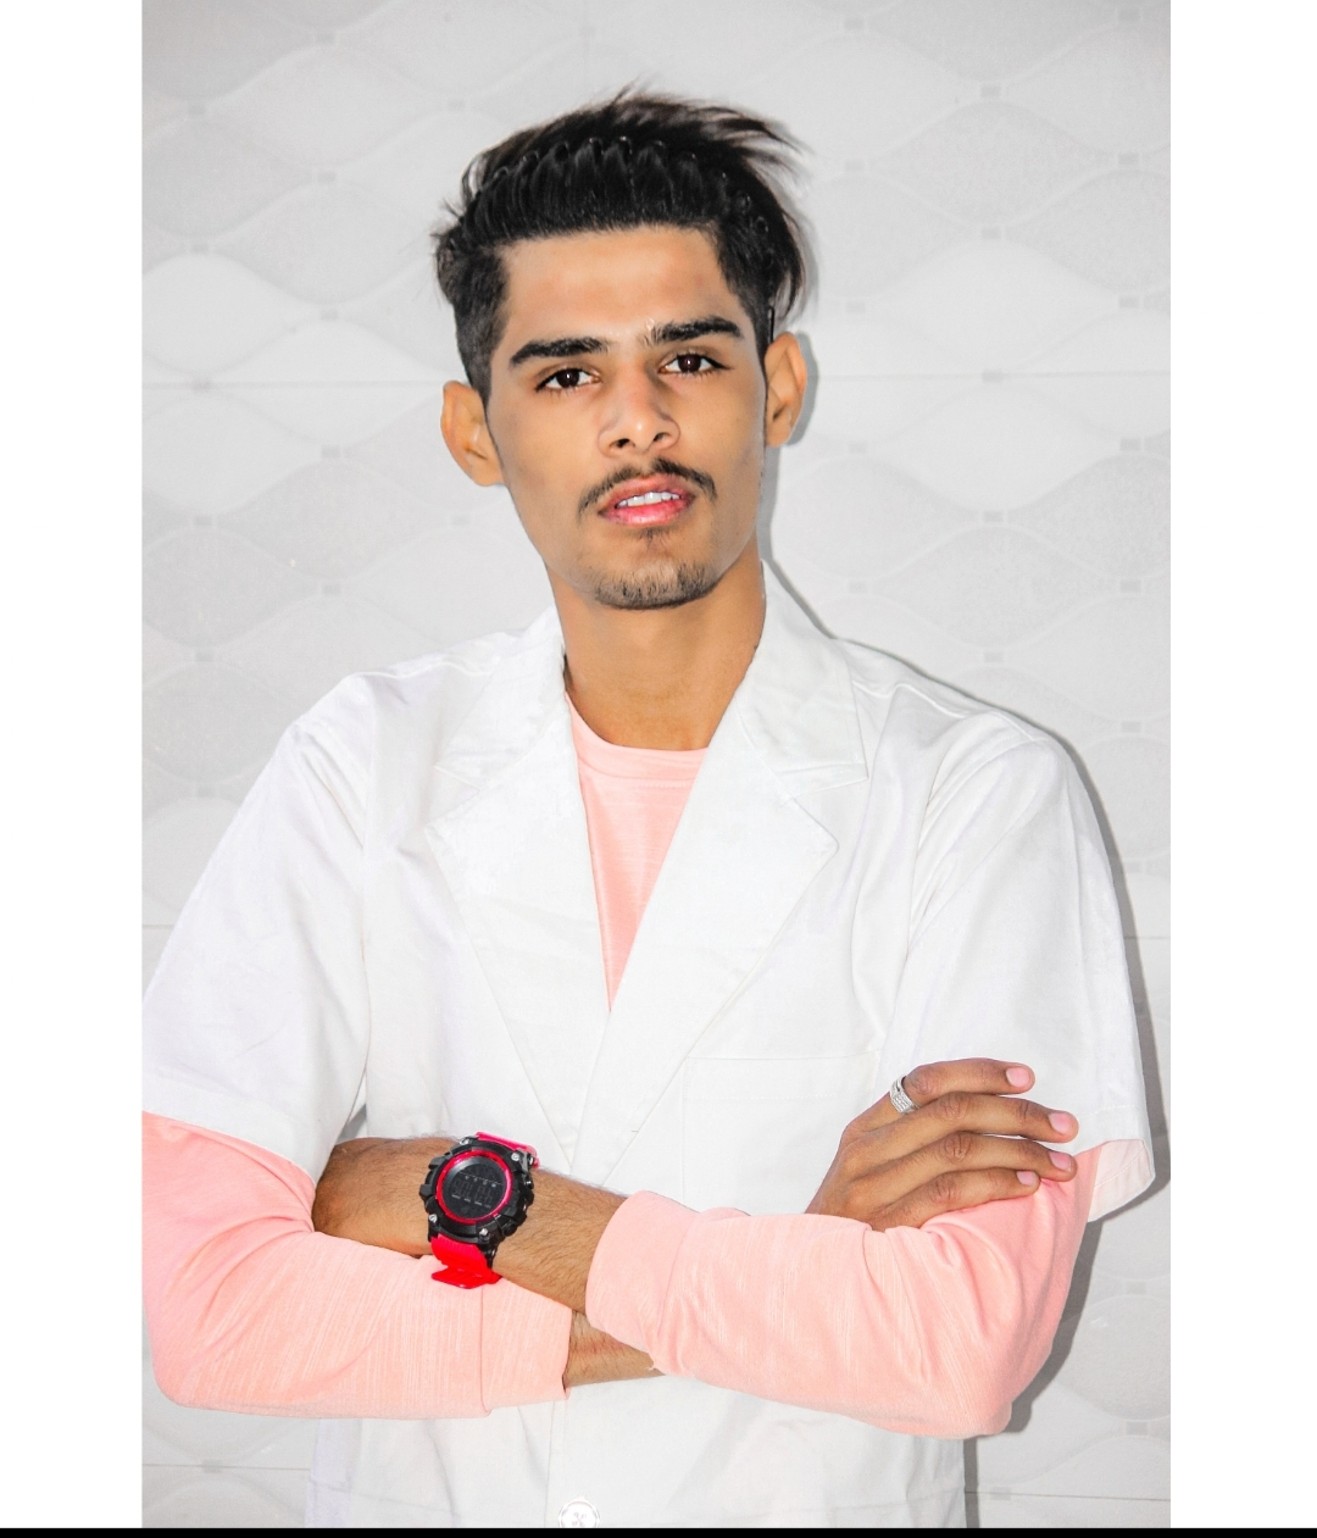 Dr. Aamir Physiotherapist  from Kota Rajasthan Vigyan Nagar Near Kota Airport  ,Kota, Rajasthan, 324006, India 3 years experience in Speciality Physical Therapist | Kayawell